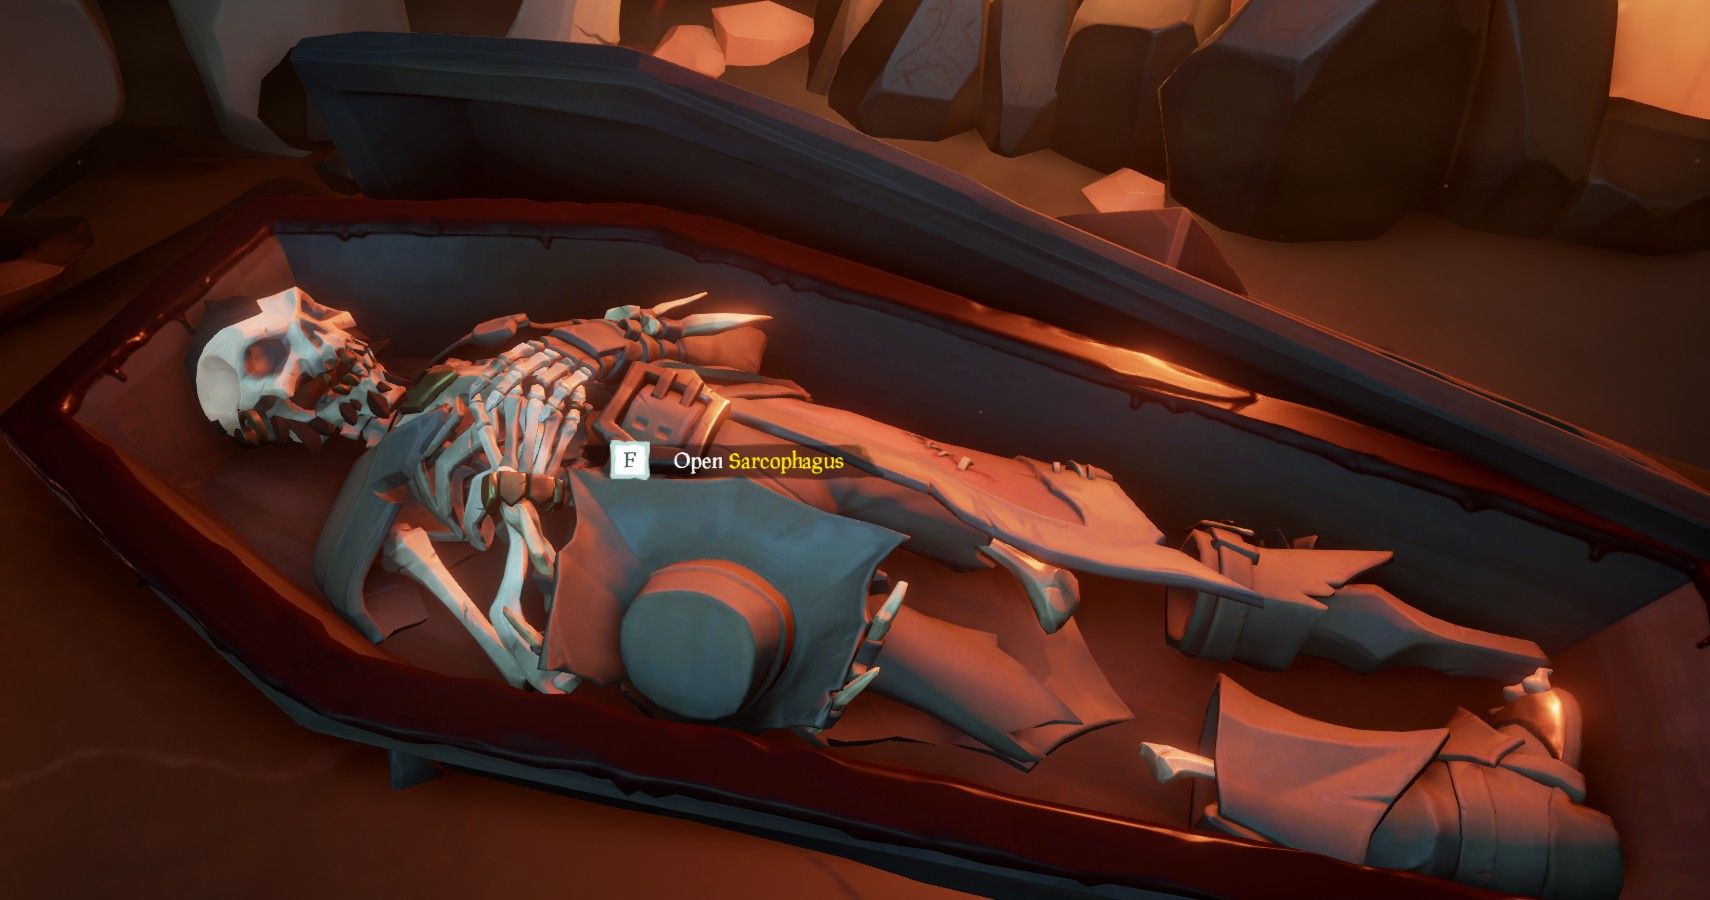 Flameheart's Sarcophagus in Sea of Thieves